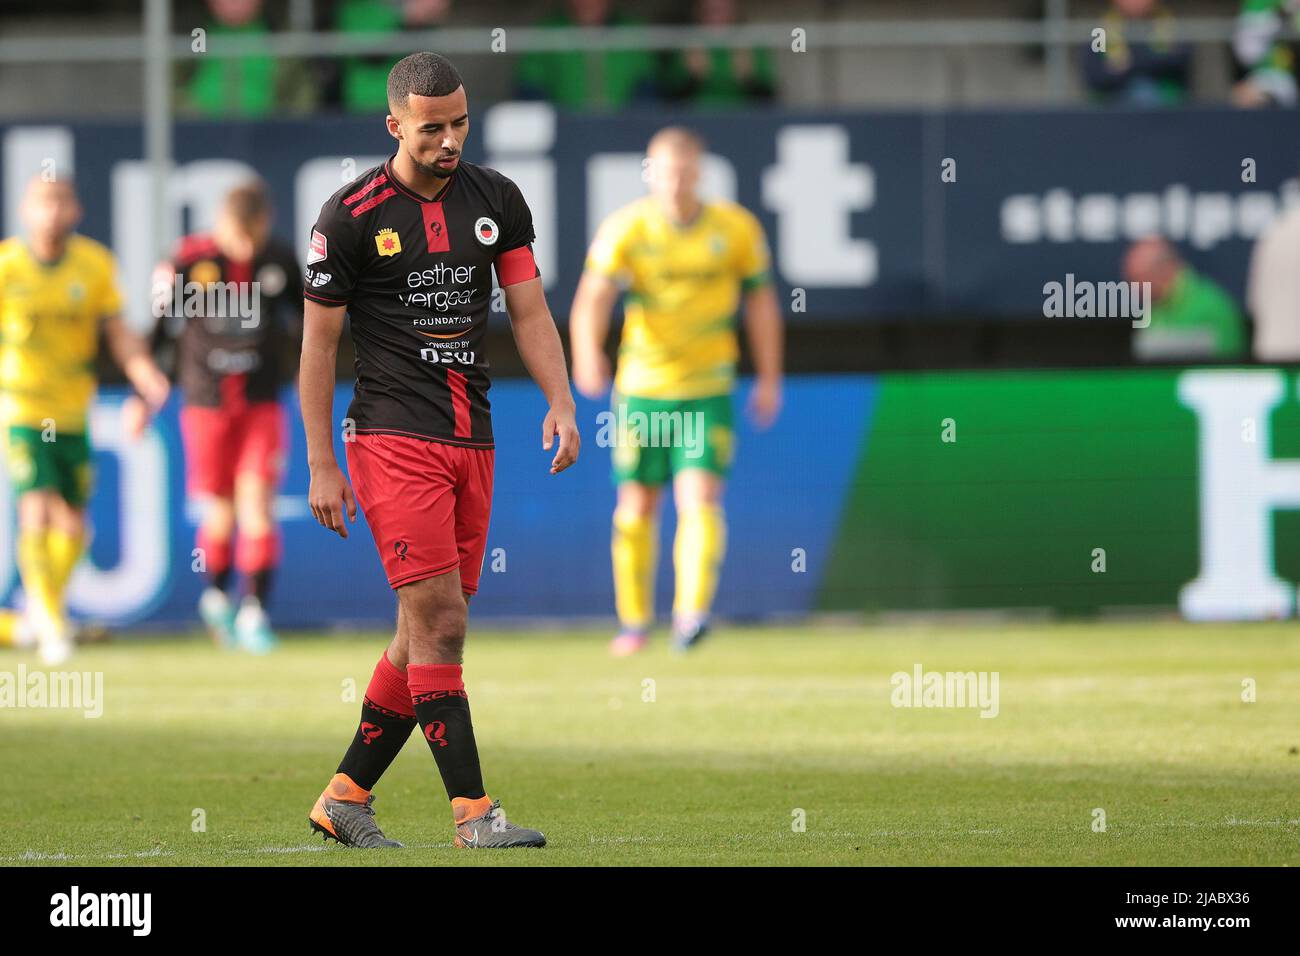 THE HAGUE - Redouan El Yaakoubi of Excelsior during the Dutch play-offs promotion/relegation final match between ADO Den Haag and Excelsior at the Cars Jeans Stadium on May 29, 2022 in The Hague, Netherlands. ANP JEROEN PUTMANS Stock Photo